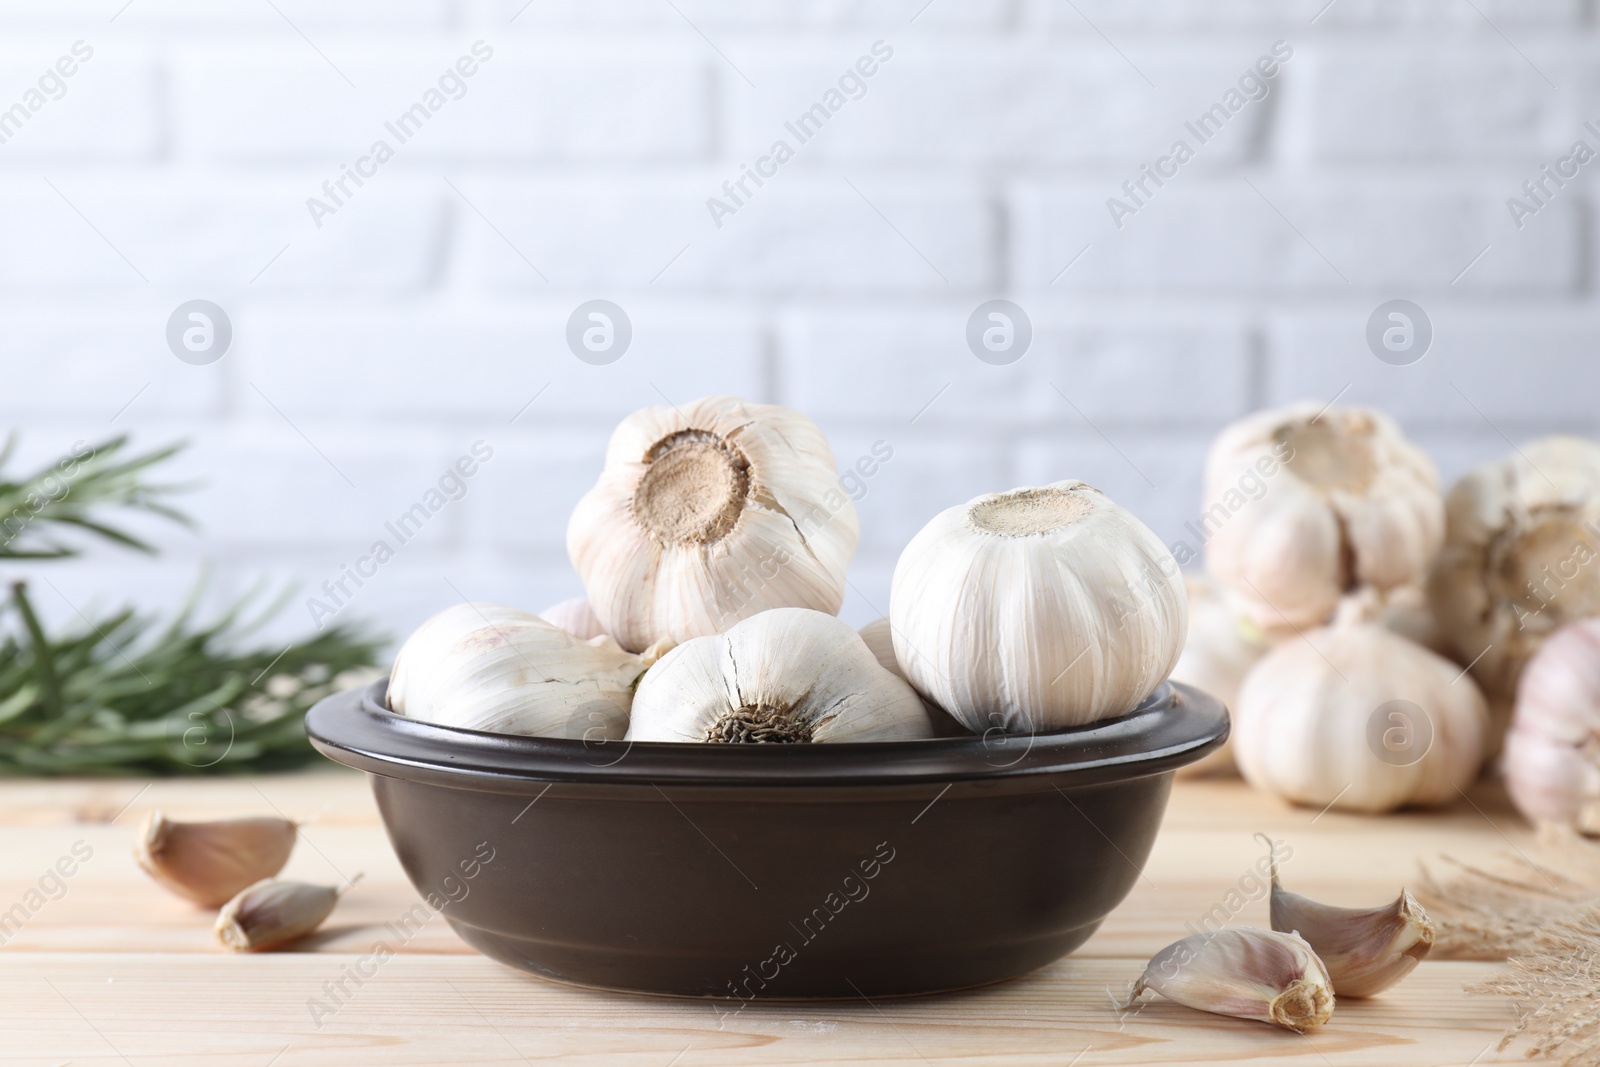 Photo of Bulbs and cloves of fresh garlic on wooden table